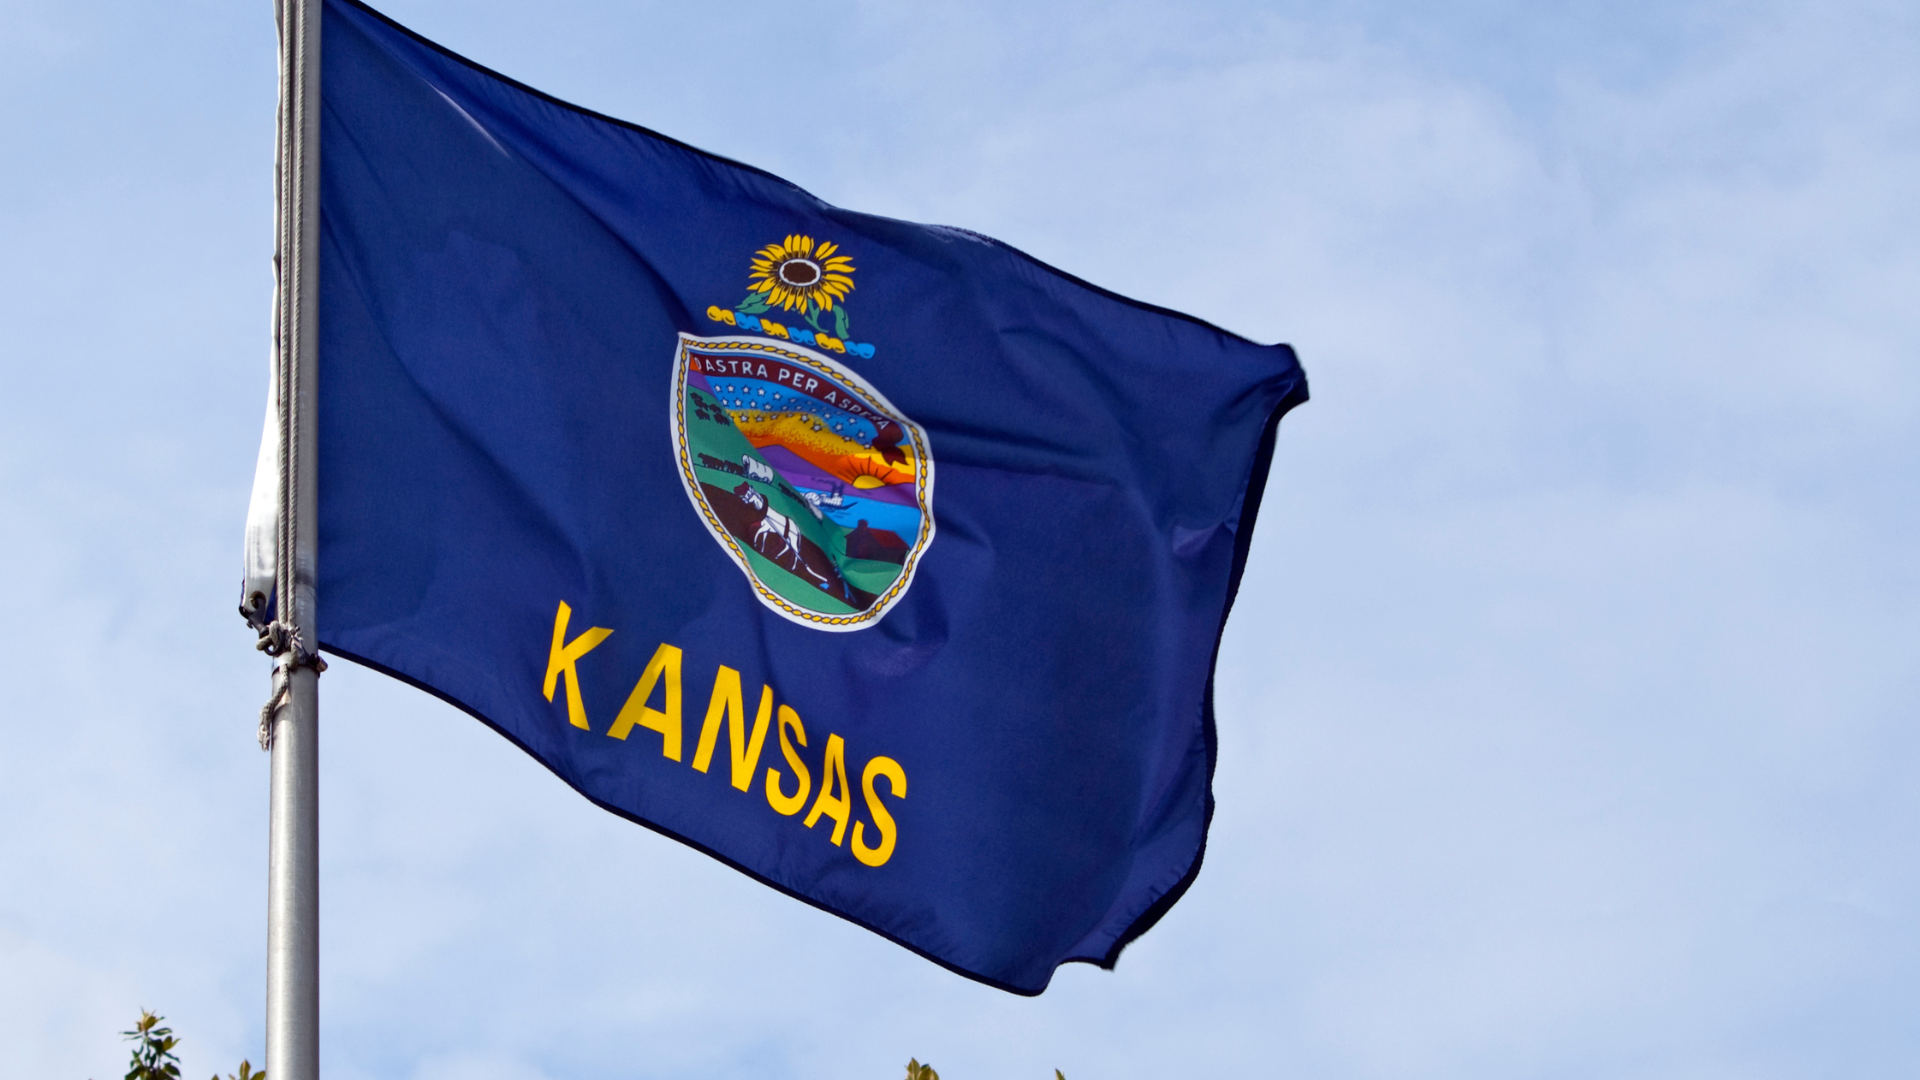 Kansas Court Record Access Issues: What Happened?